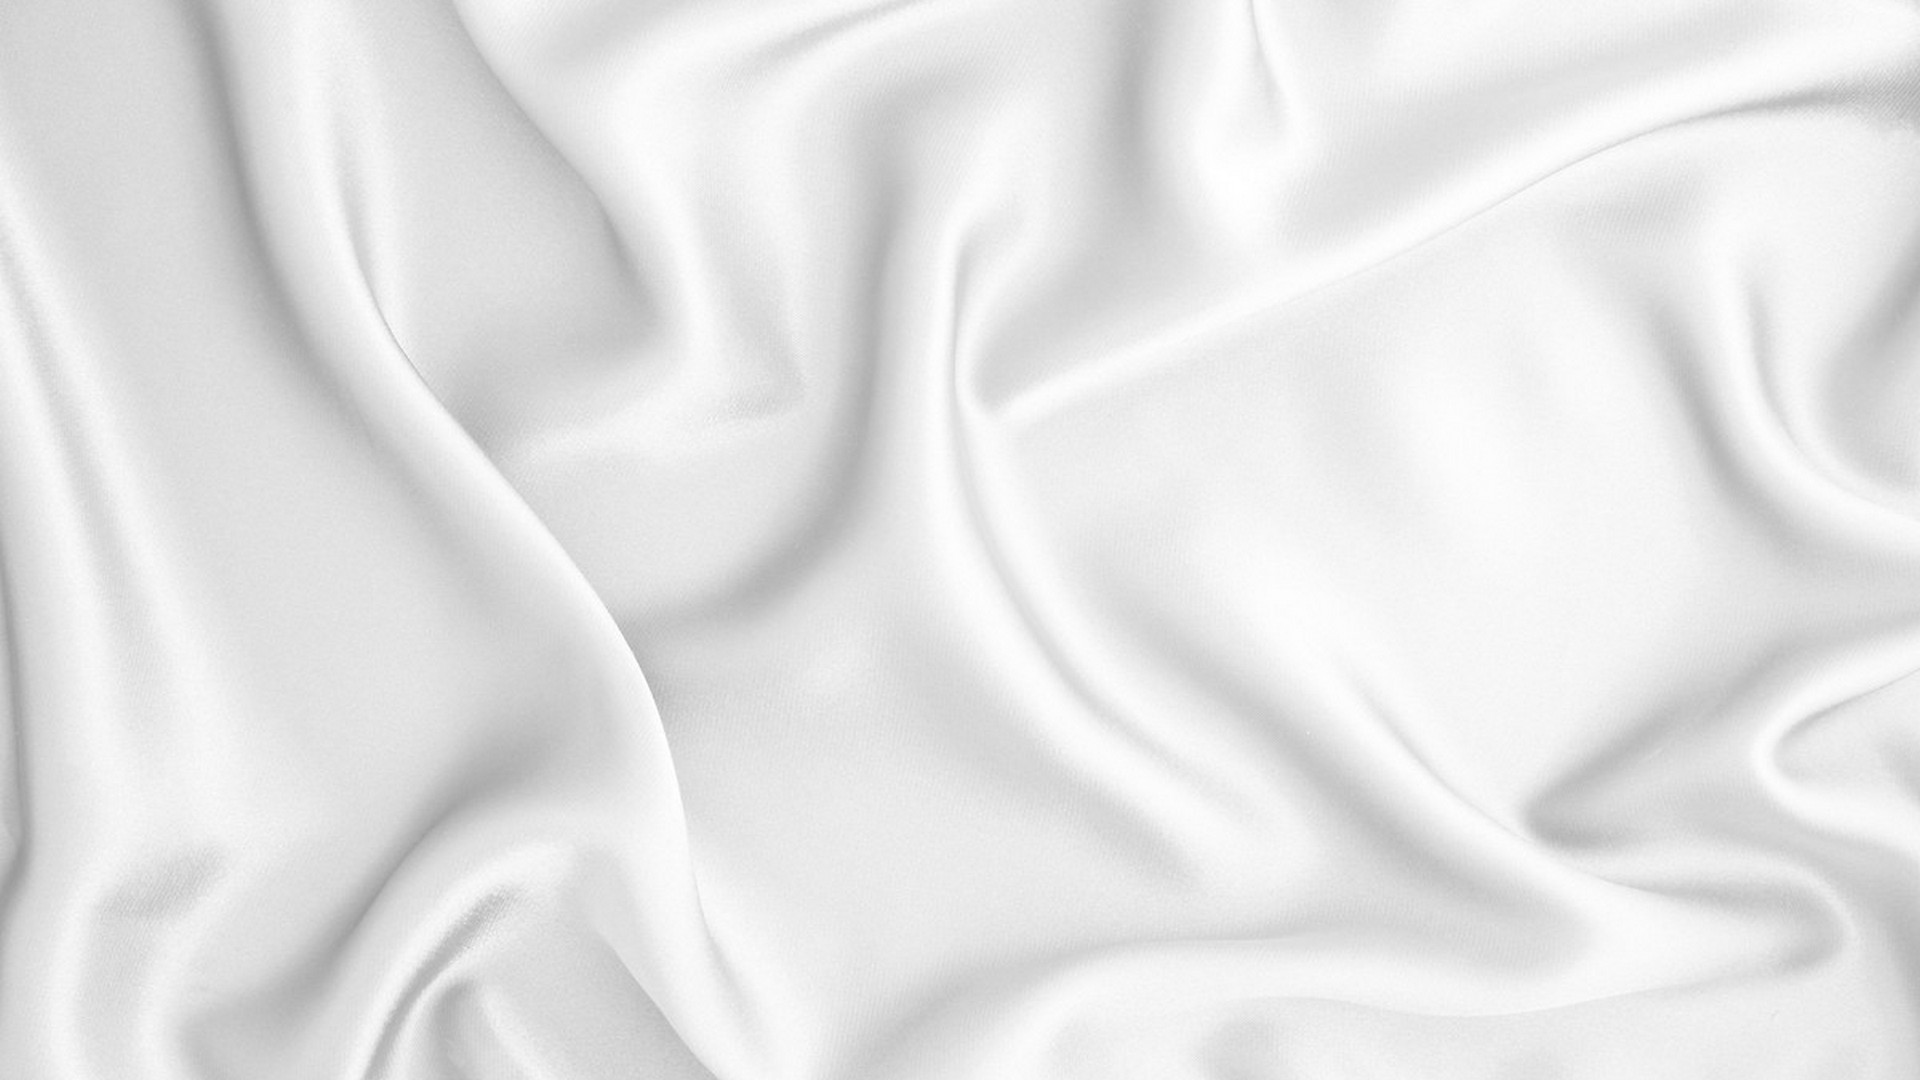 White Silk Wallpaper For Desktop With high-resolution 1920X1080 pixel. You can use this wallpaper for your Windows and Mac OS computers as well as your Android and iPhone smartphones